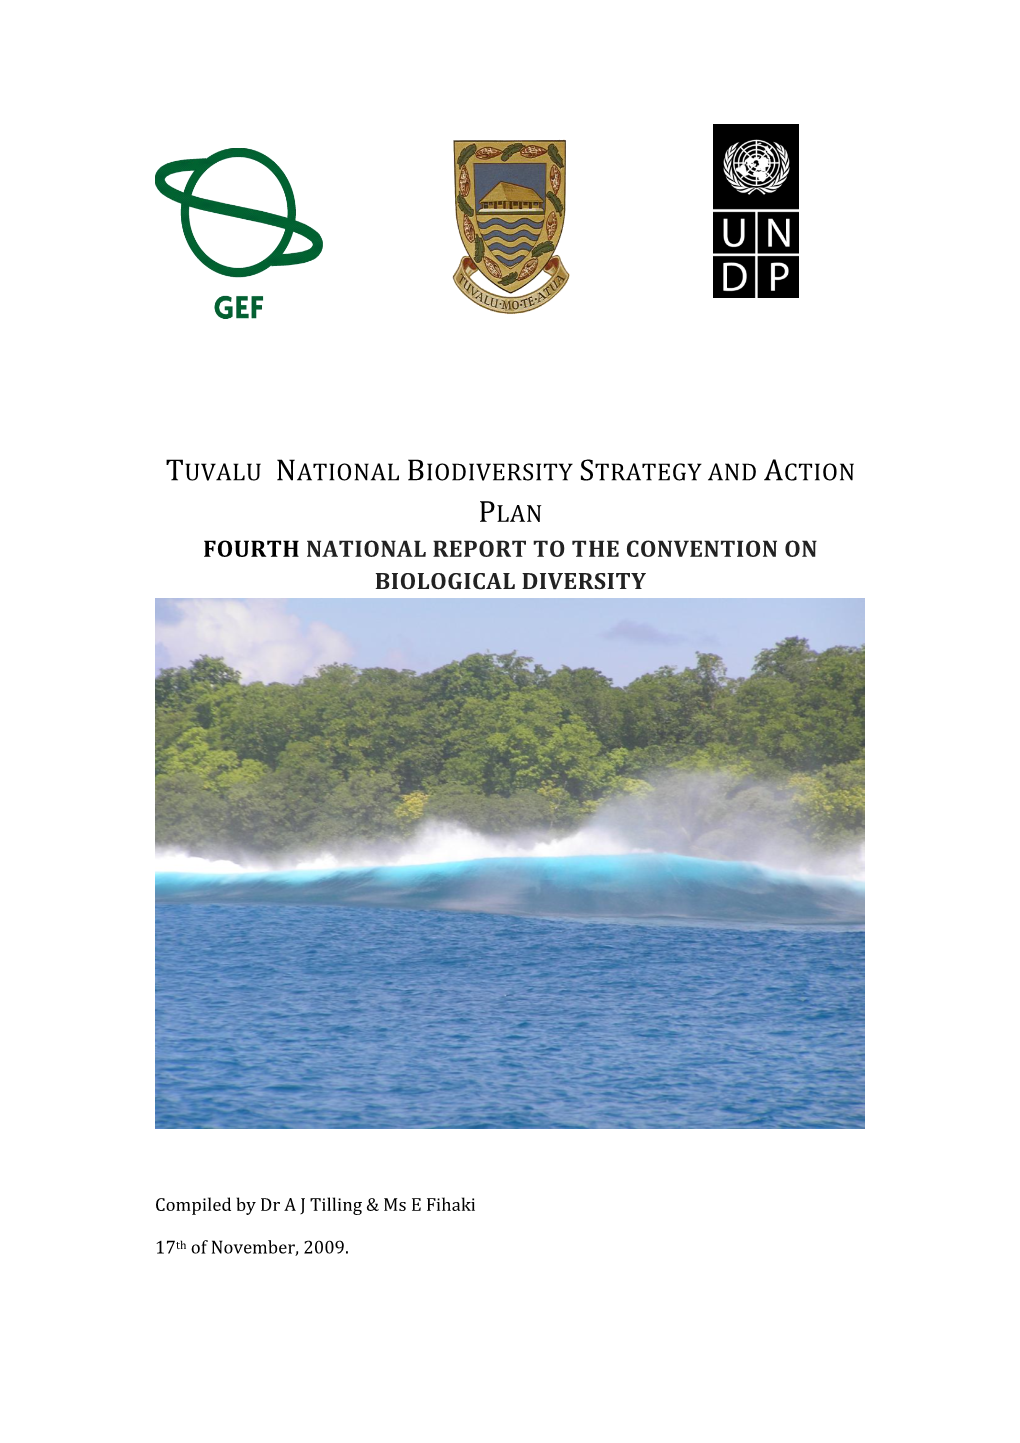 Tuvalu National Biodiversity Strategy and Action Plan Fourth National Report to the Convention on Biological Diversity